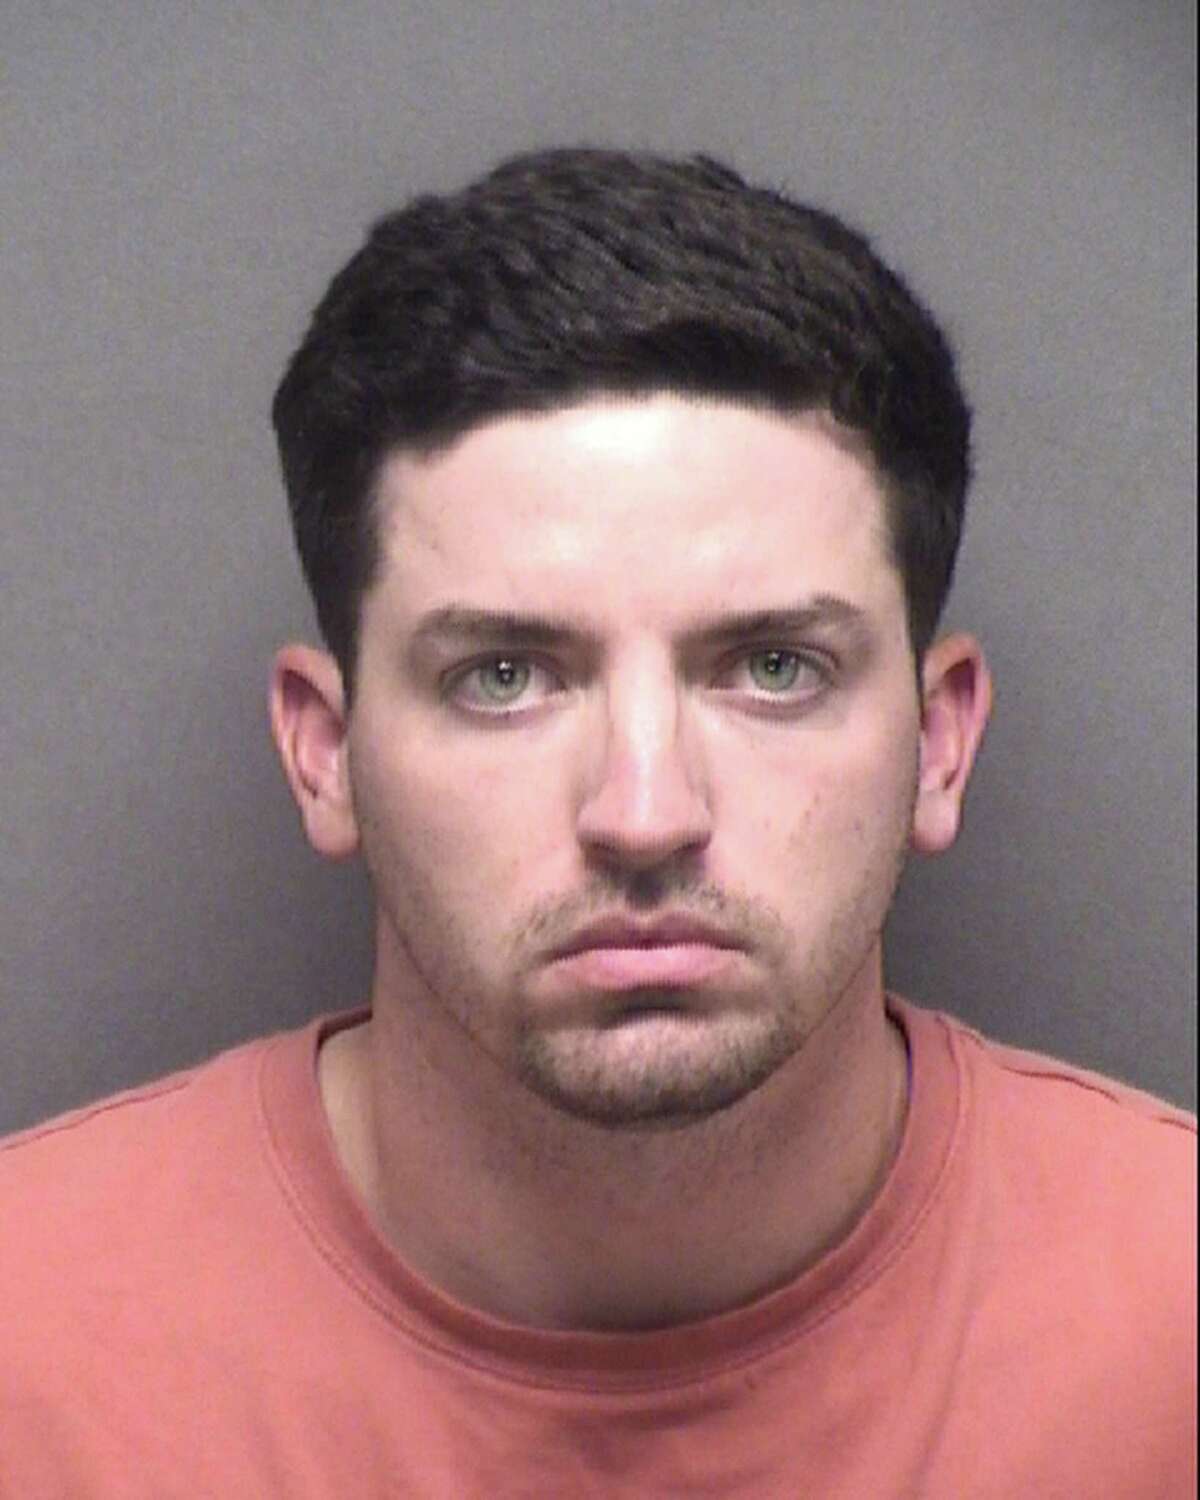 James Brennand, 27, was arrested Tuesday on two counts of aggravated assault by a peace officer in connection with the Oct. 2 shooting of 17-year-old Erik Cantu and a passenger in the car Cantu was driving at the time of the incident.